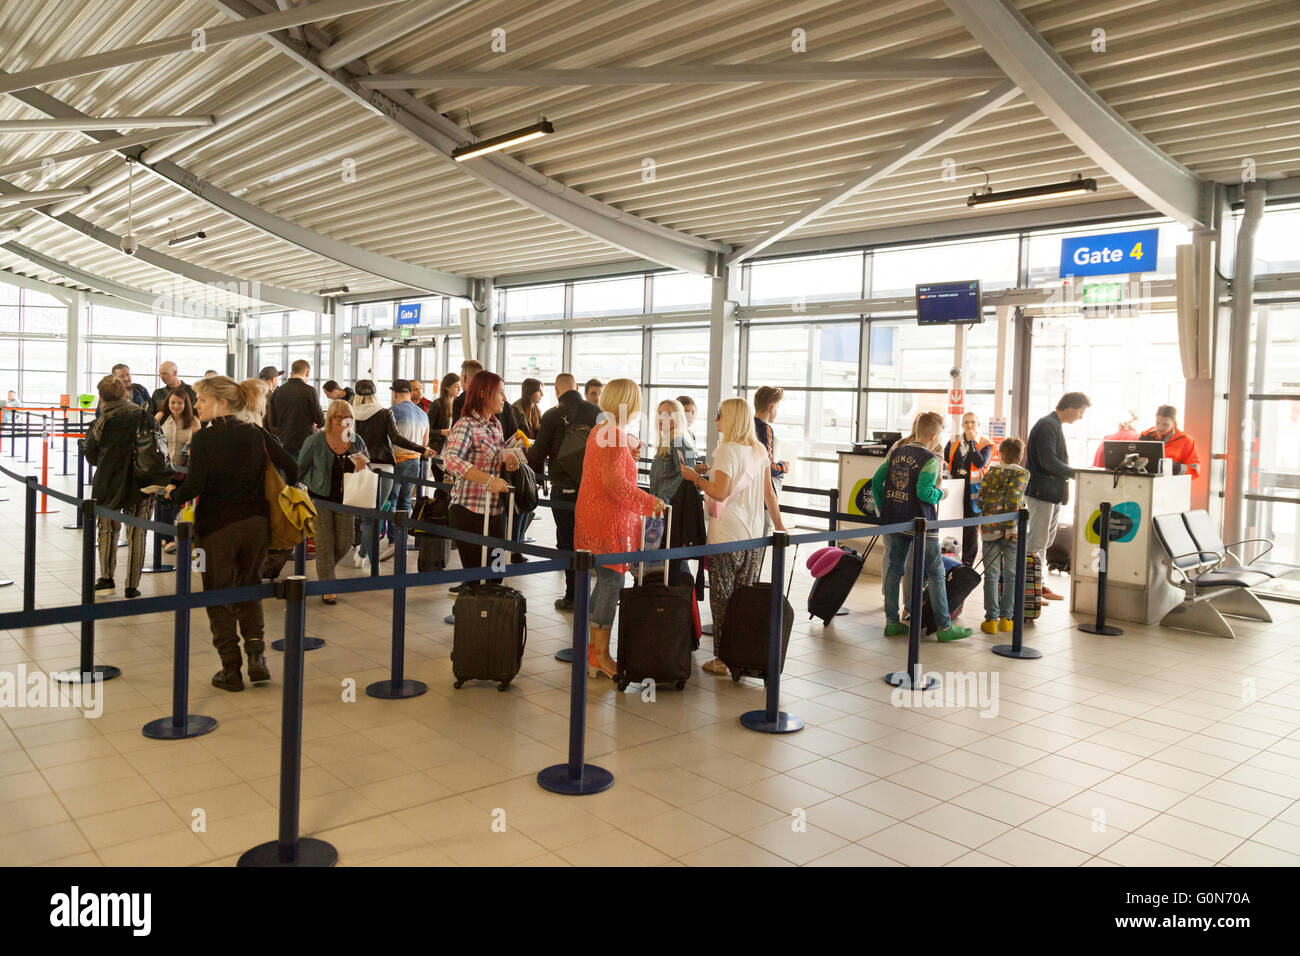 Air passengers, people waiting at the gate, departures, London Southend airport, Southend, Essex UK Stock Photo